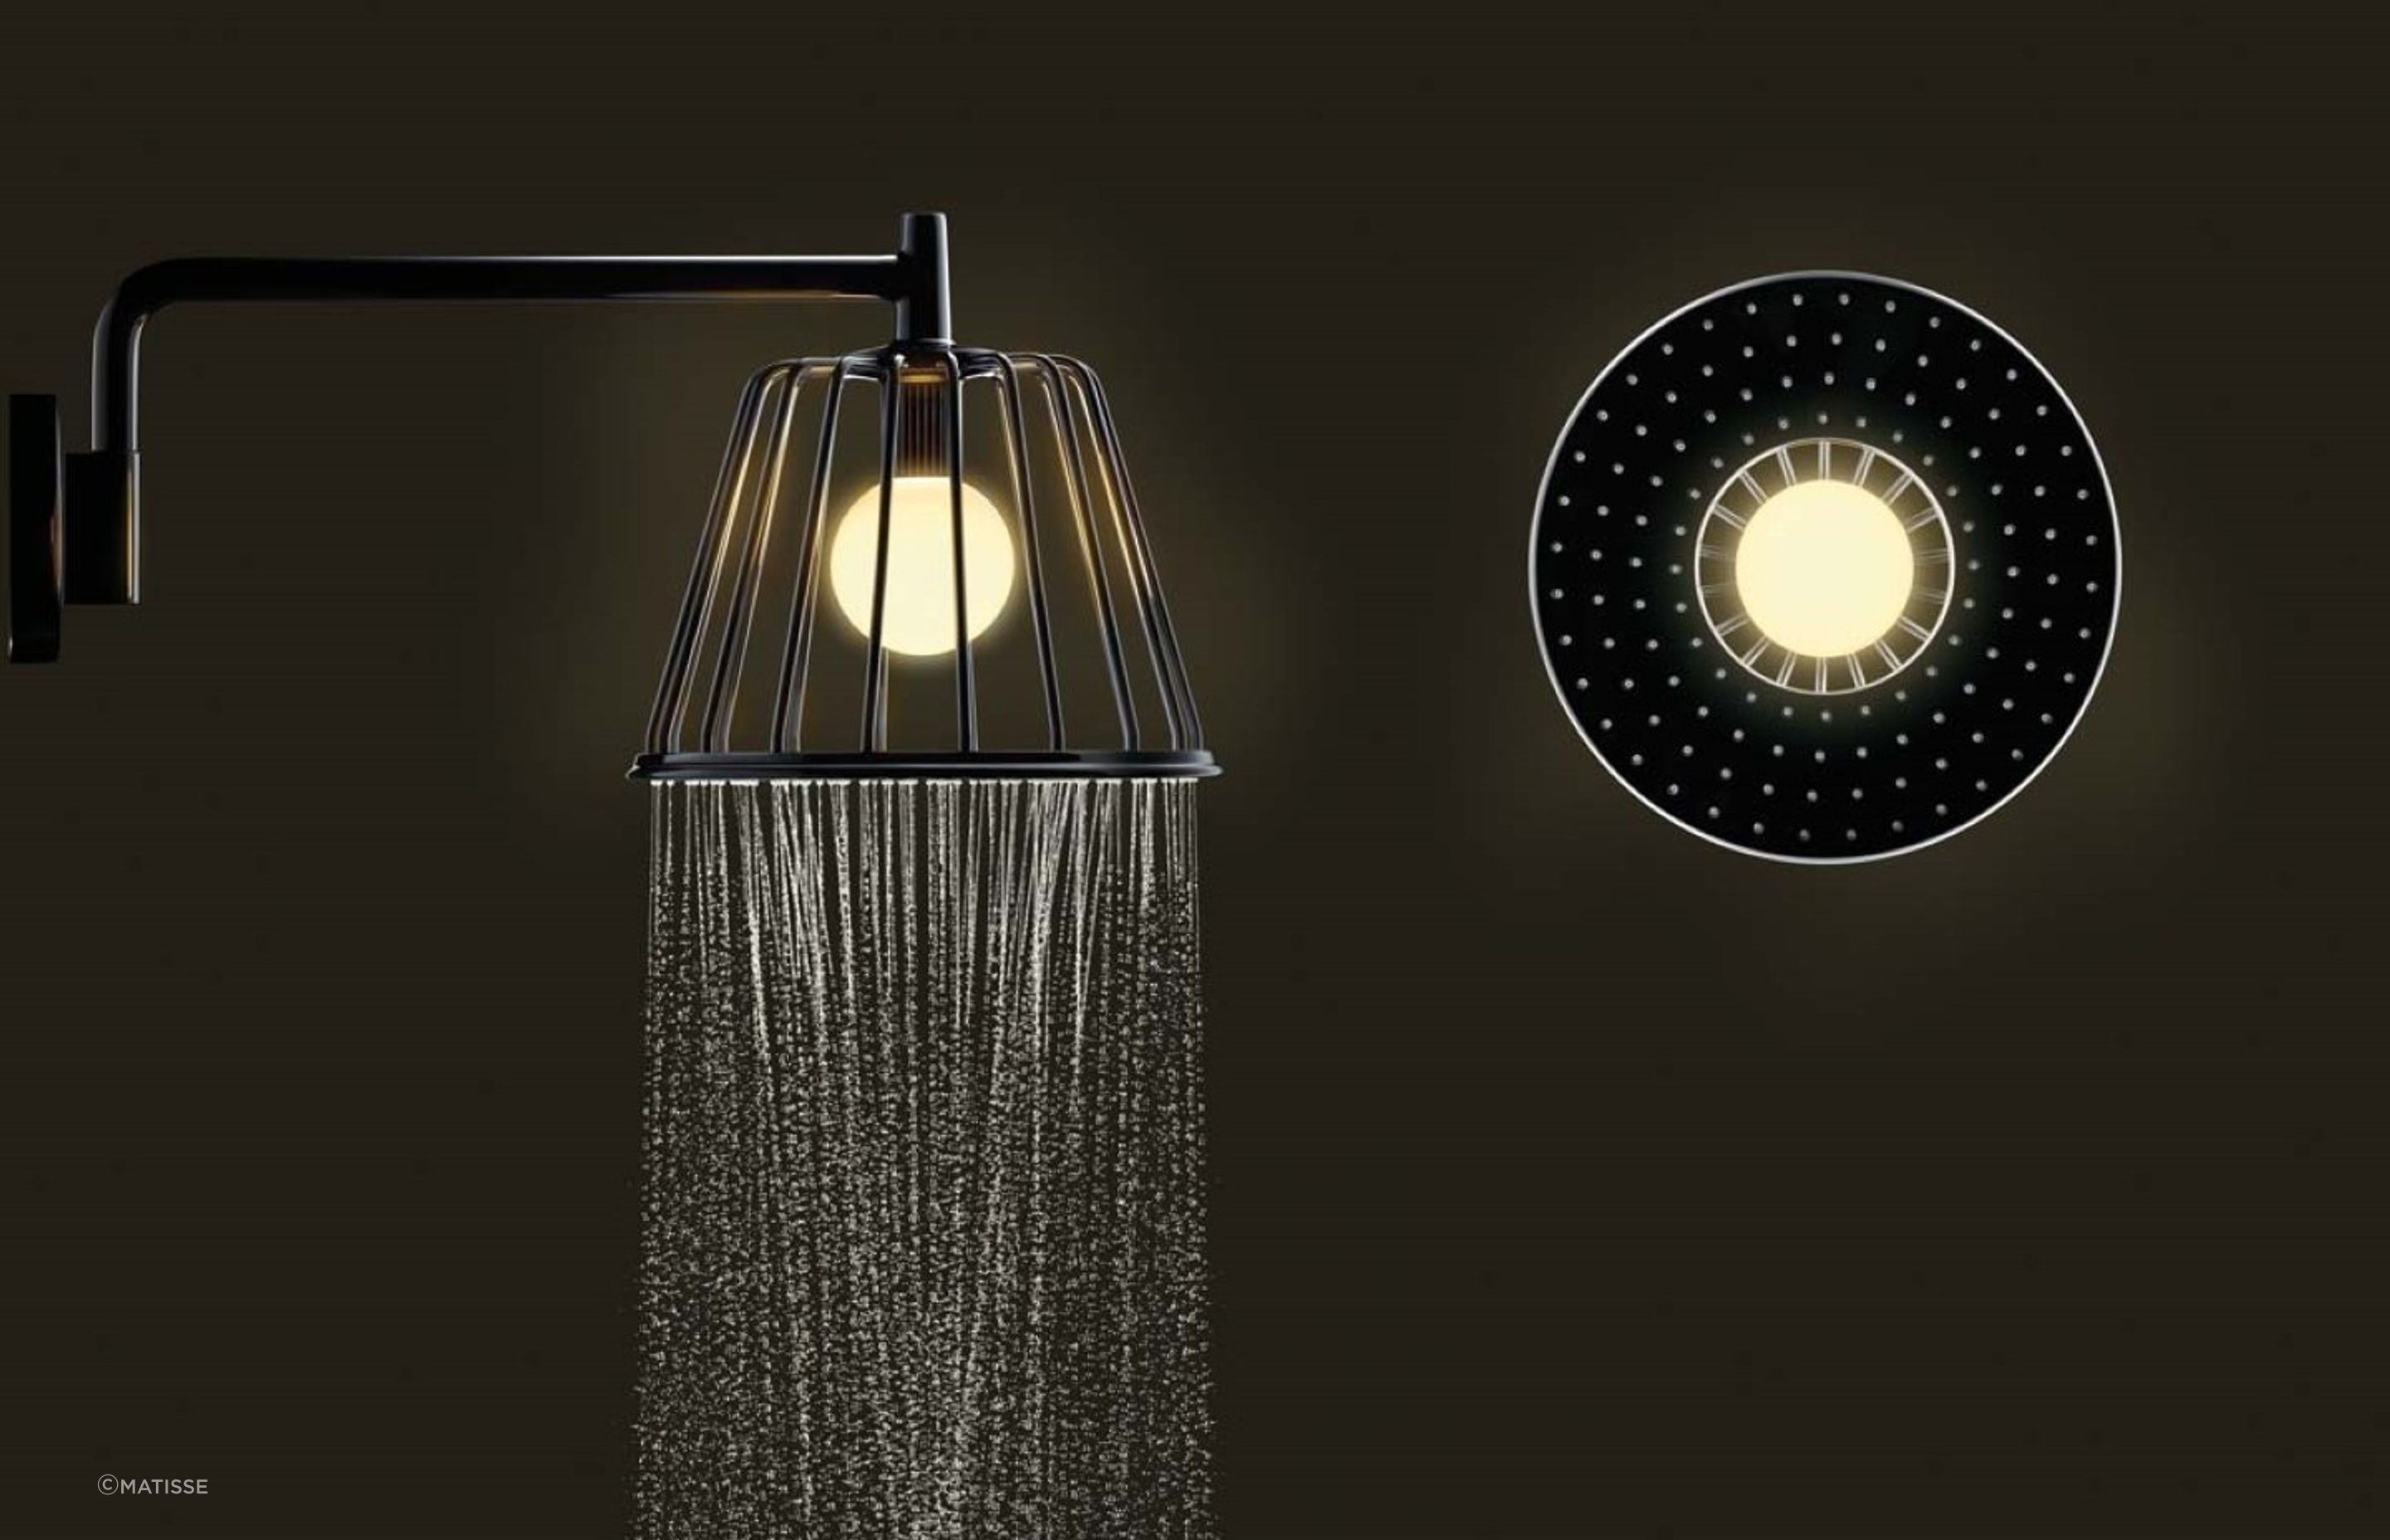 The innovative Axor LampShower by Hansgrohe offers an illuminating showering experience.